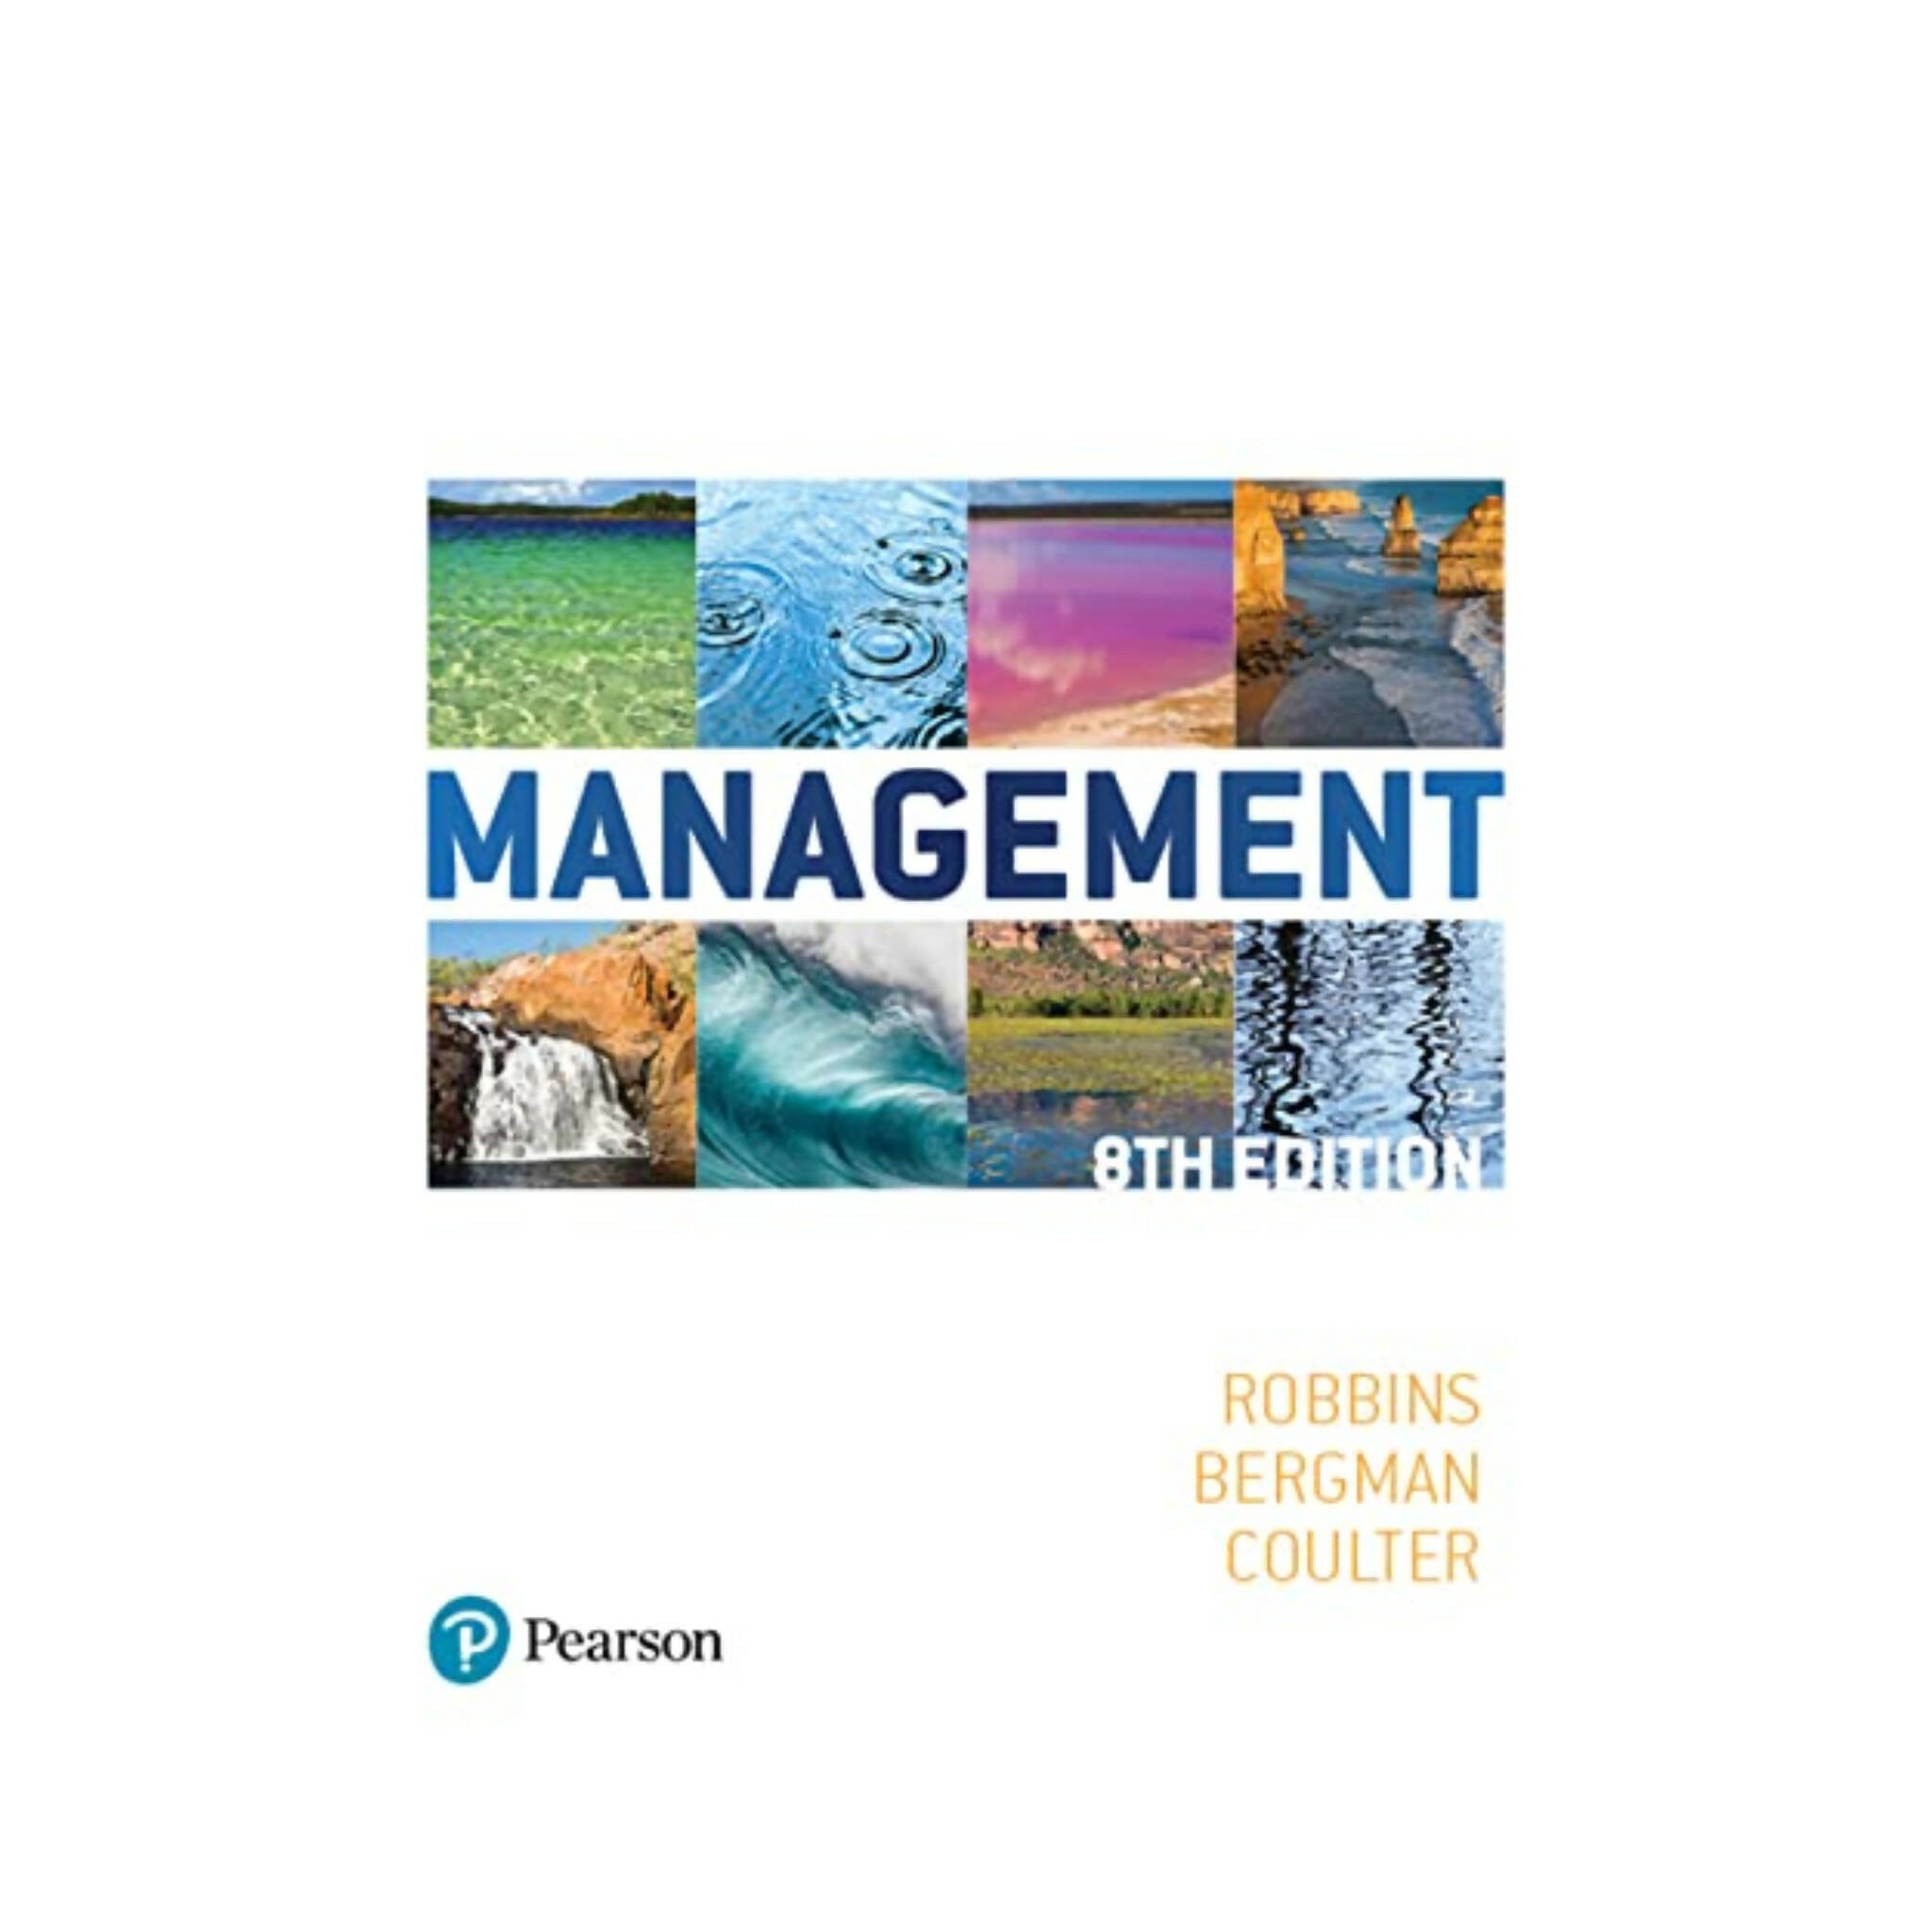 Book, Management, for Understanding The Complexities Of Managing People